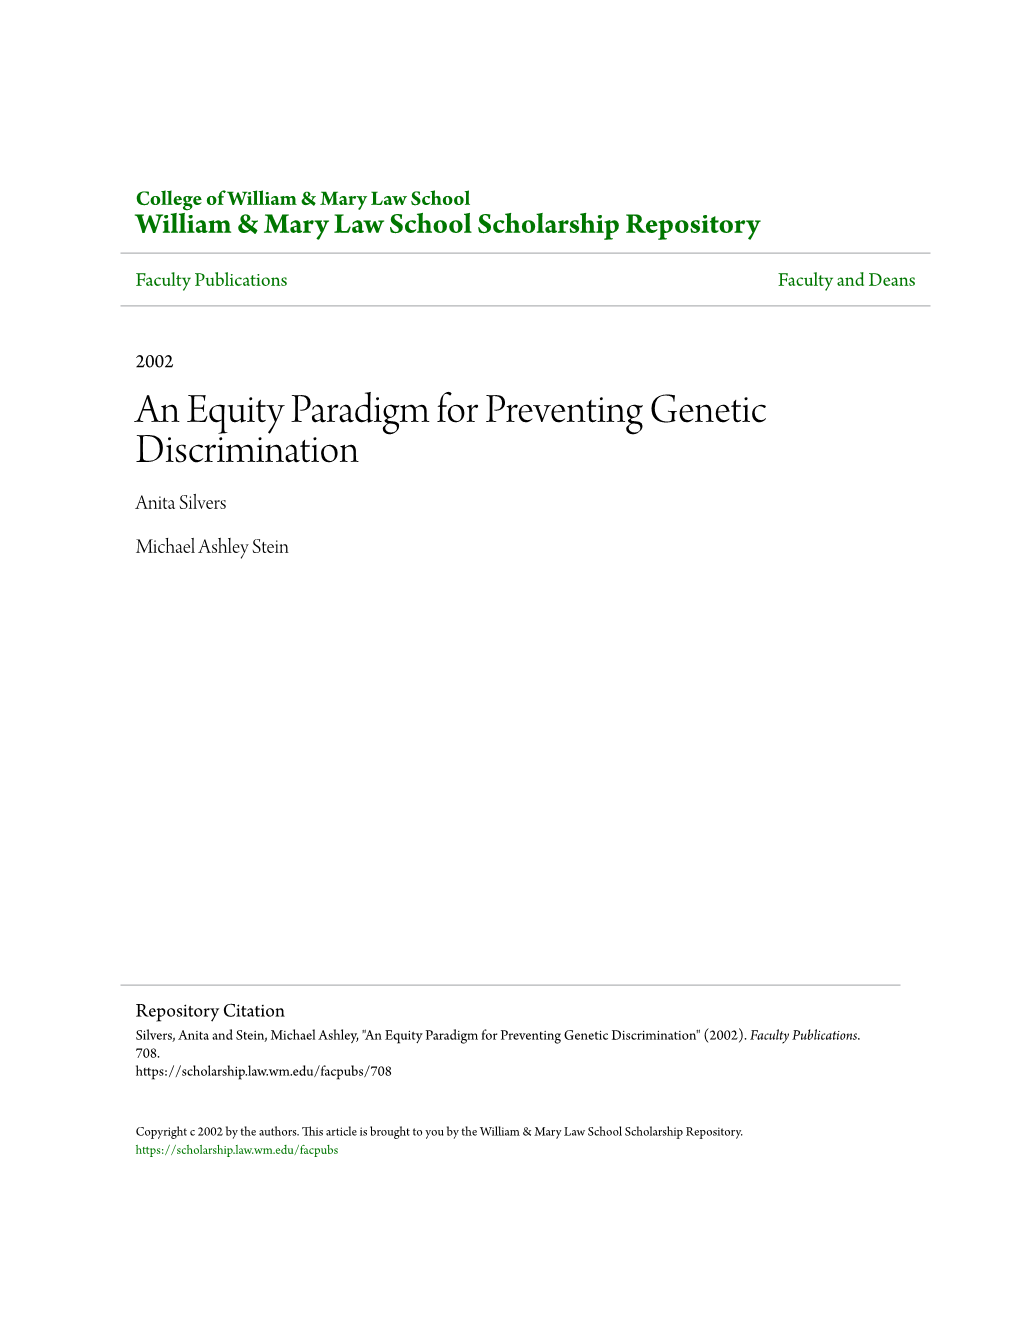 An Equity Paradigm for Preventing Genetic Discrimination Anita Silvers